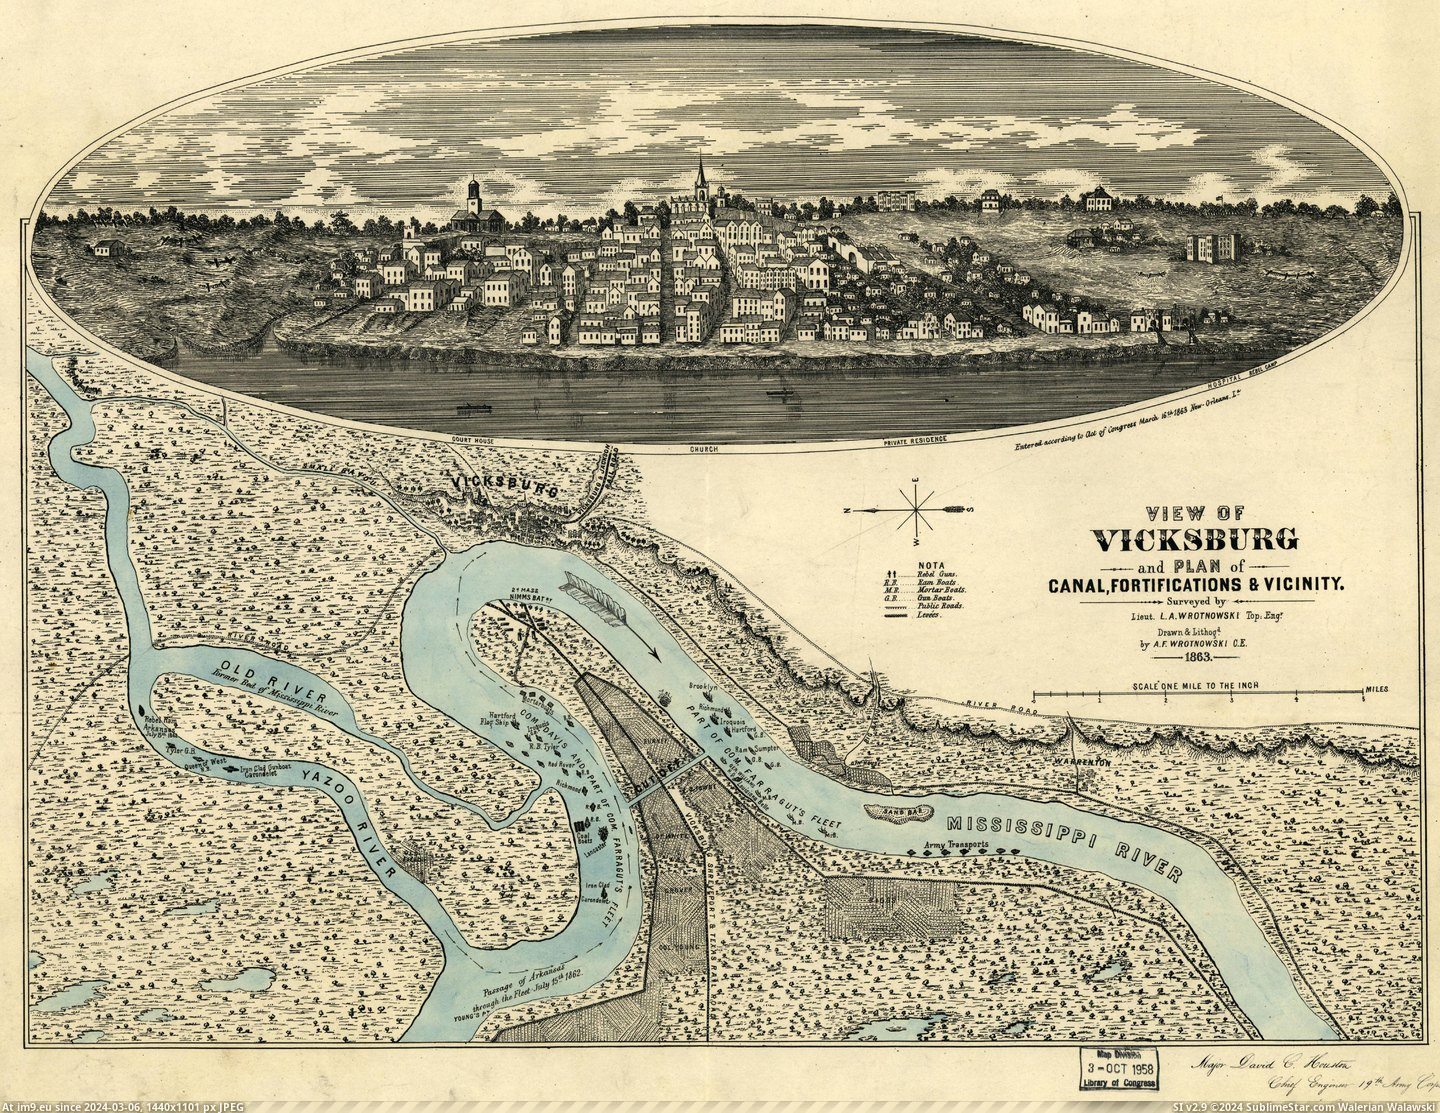 #Plan #Vicinity #Canal [Mapporn] View of Vicksburg and plan of the canal, fortifications and vicinity, L.A. Wrotnowski, 1863. [6552x5024] Pic. (Bild von album My r/MAPS favs))